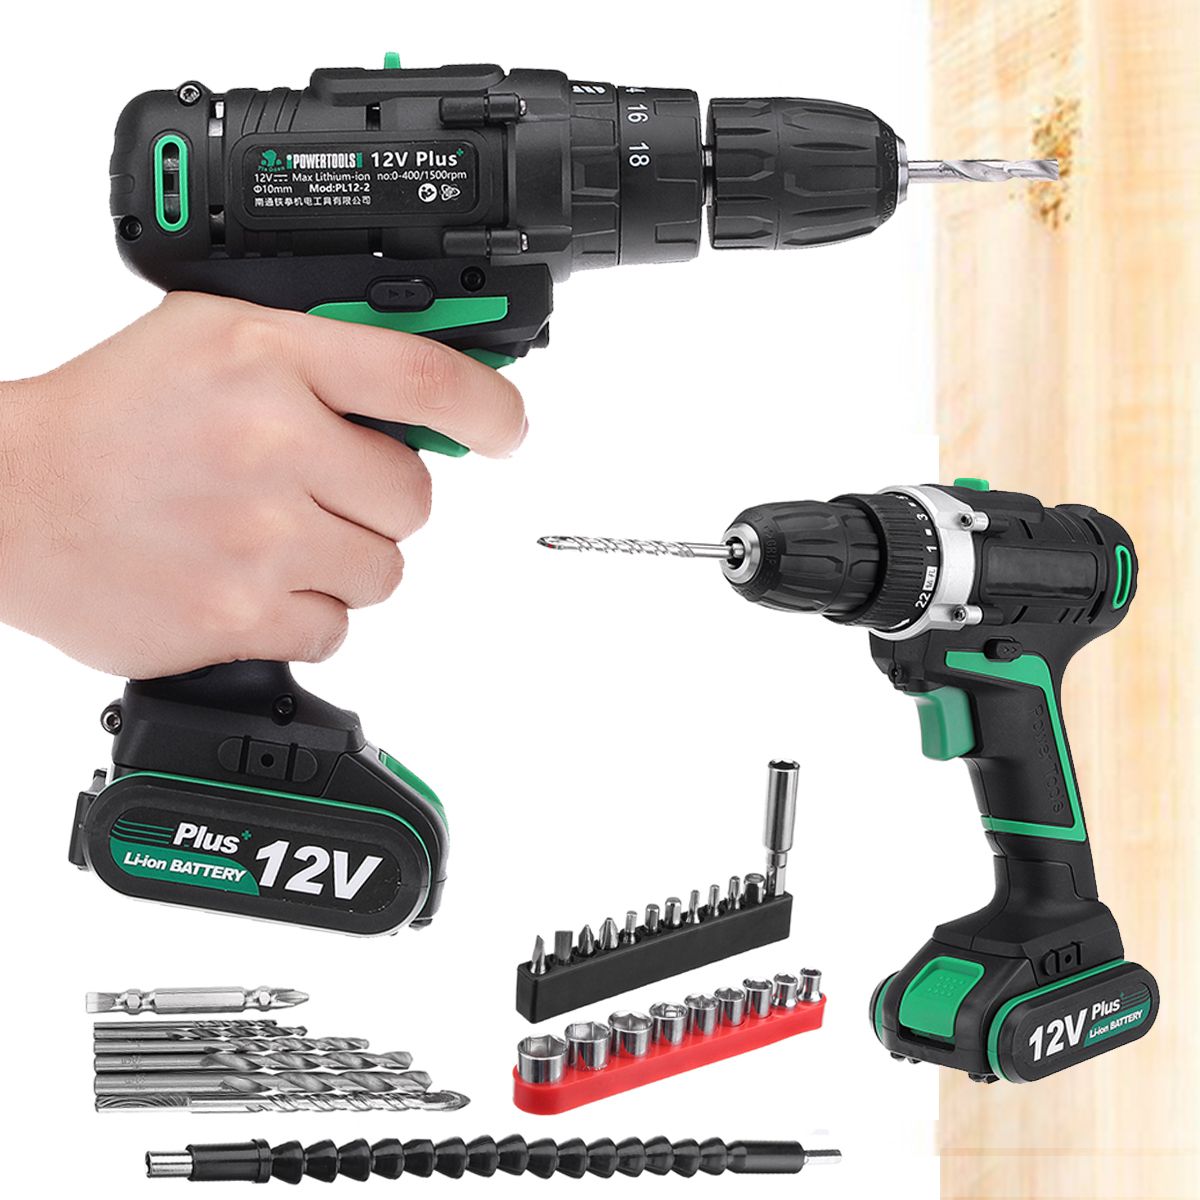 AC100-240V-Electric-Screwdriver-Cordless-Power-Drill-Tools-Dual-Speed-Impact-With-Accessories-1285297